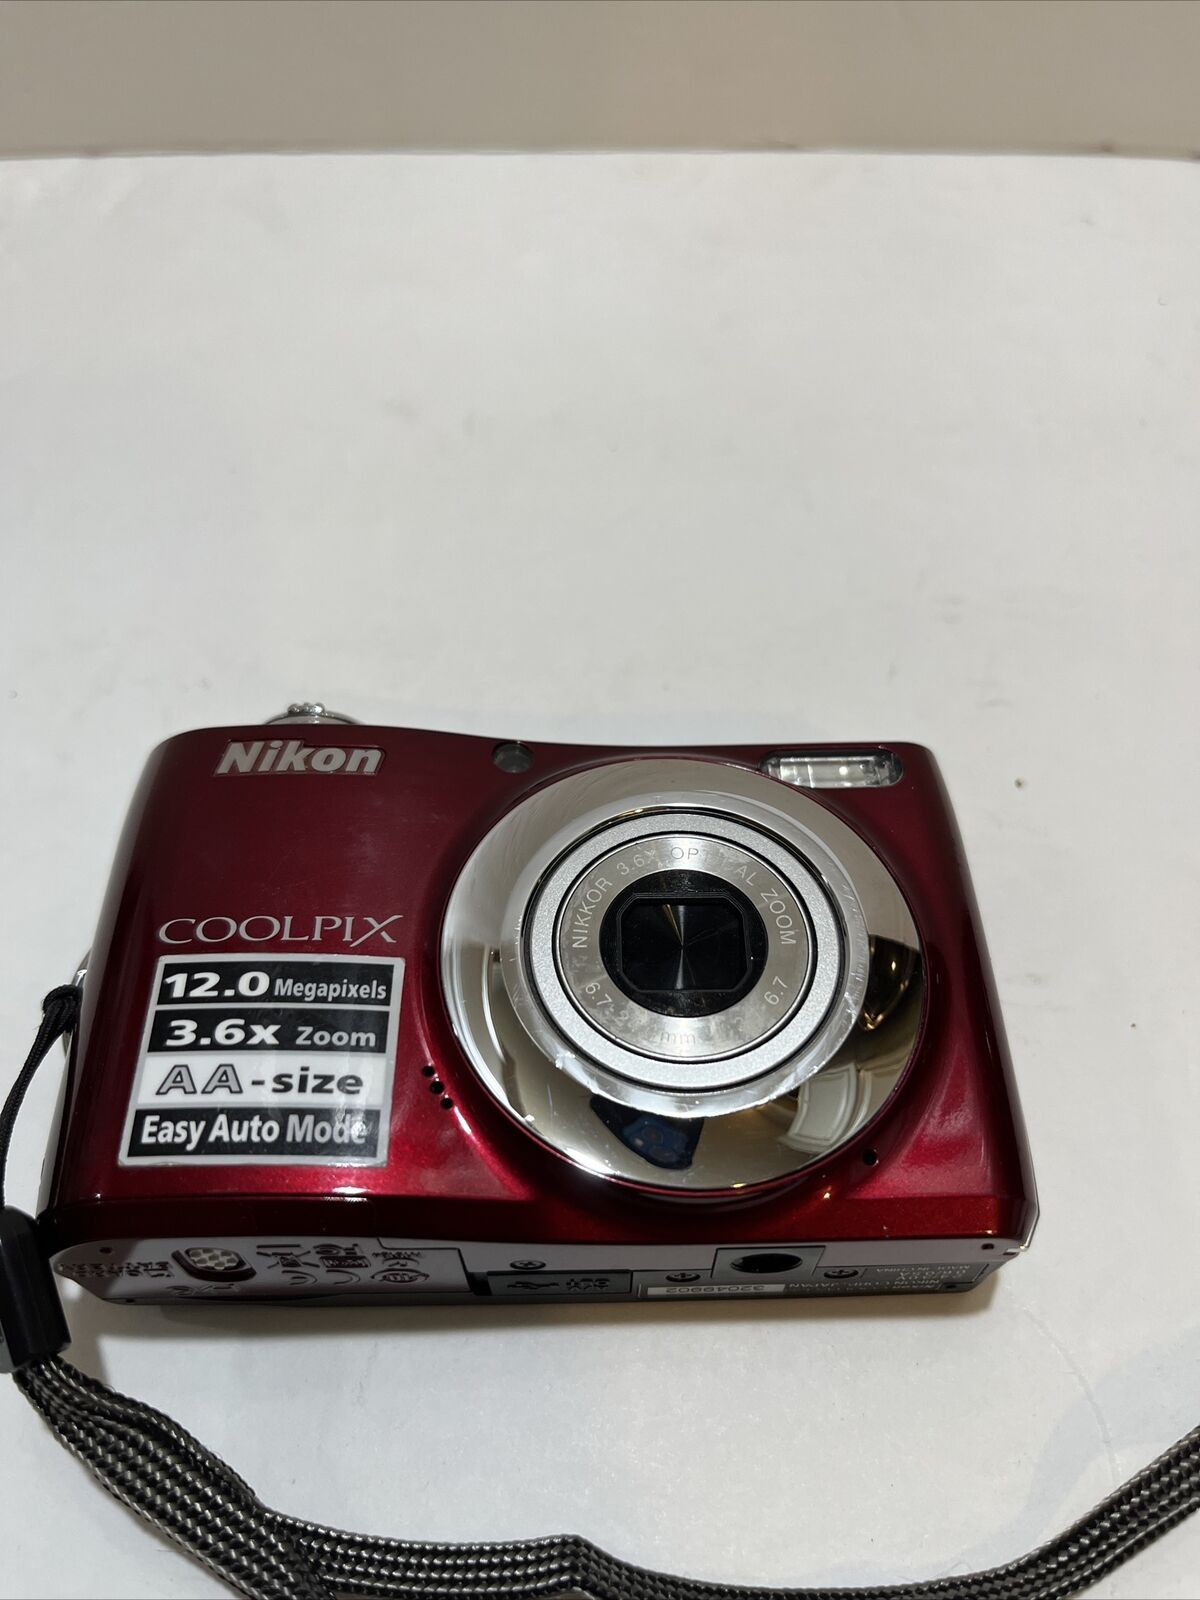 Used Nikon Coolpix L22 Point and Shoot Camera Red - Used Very